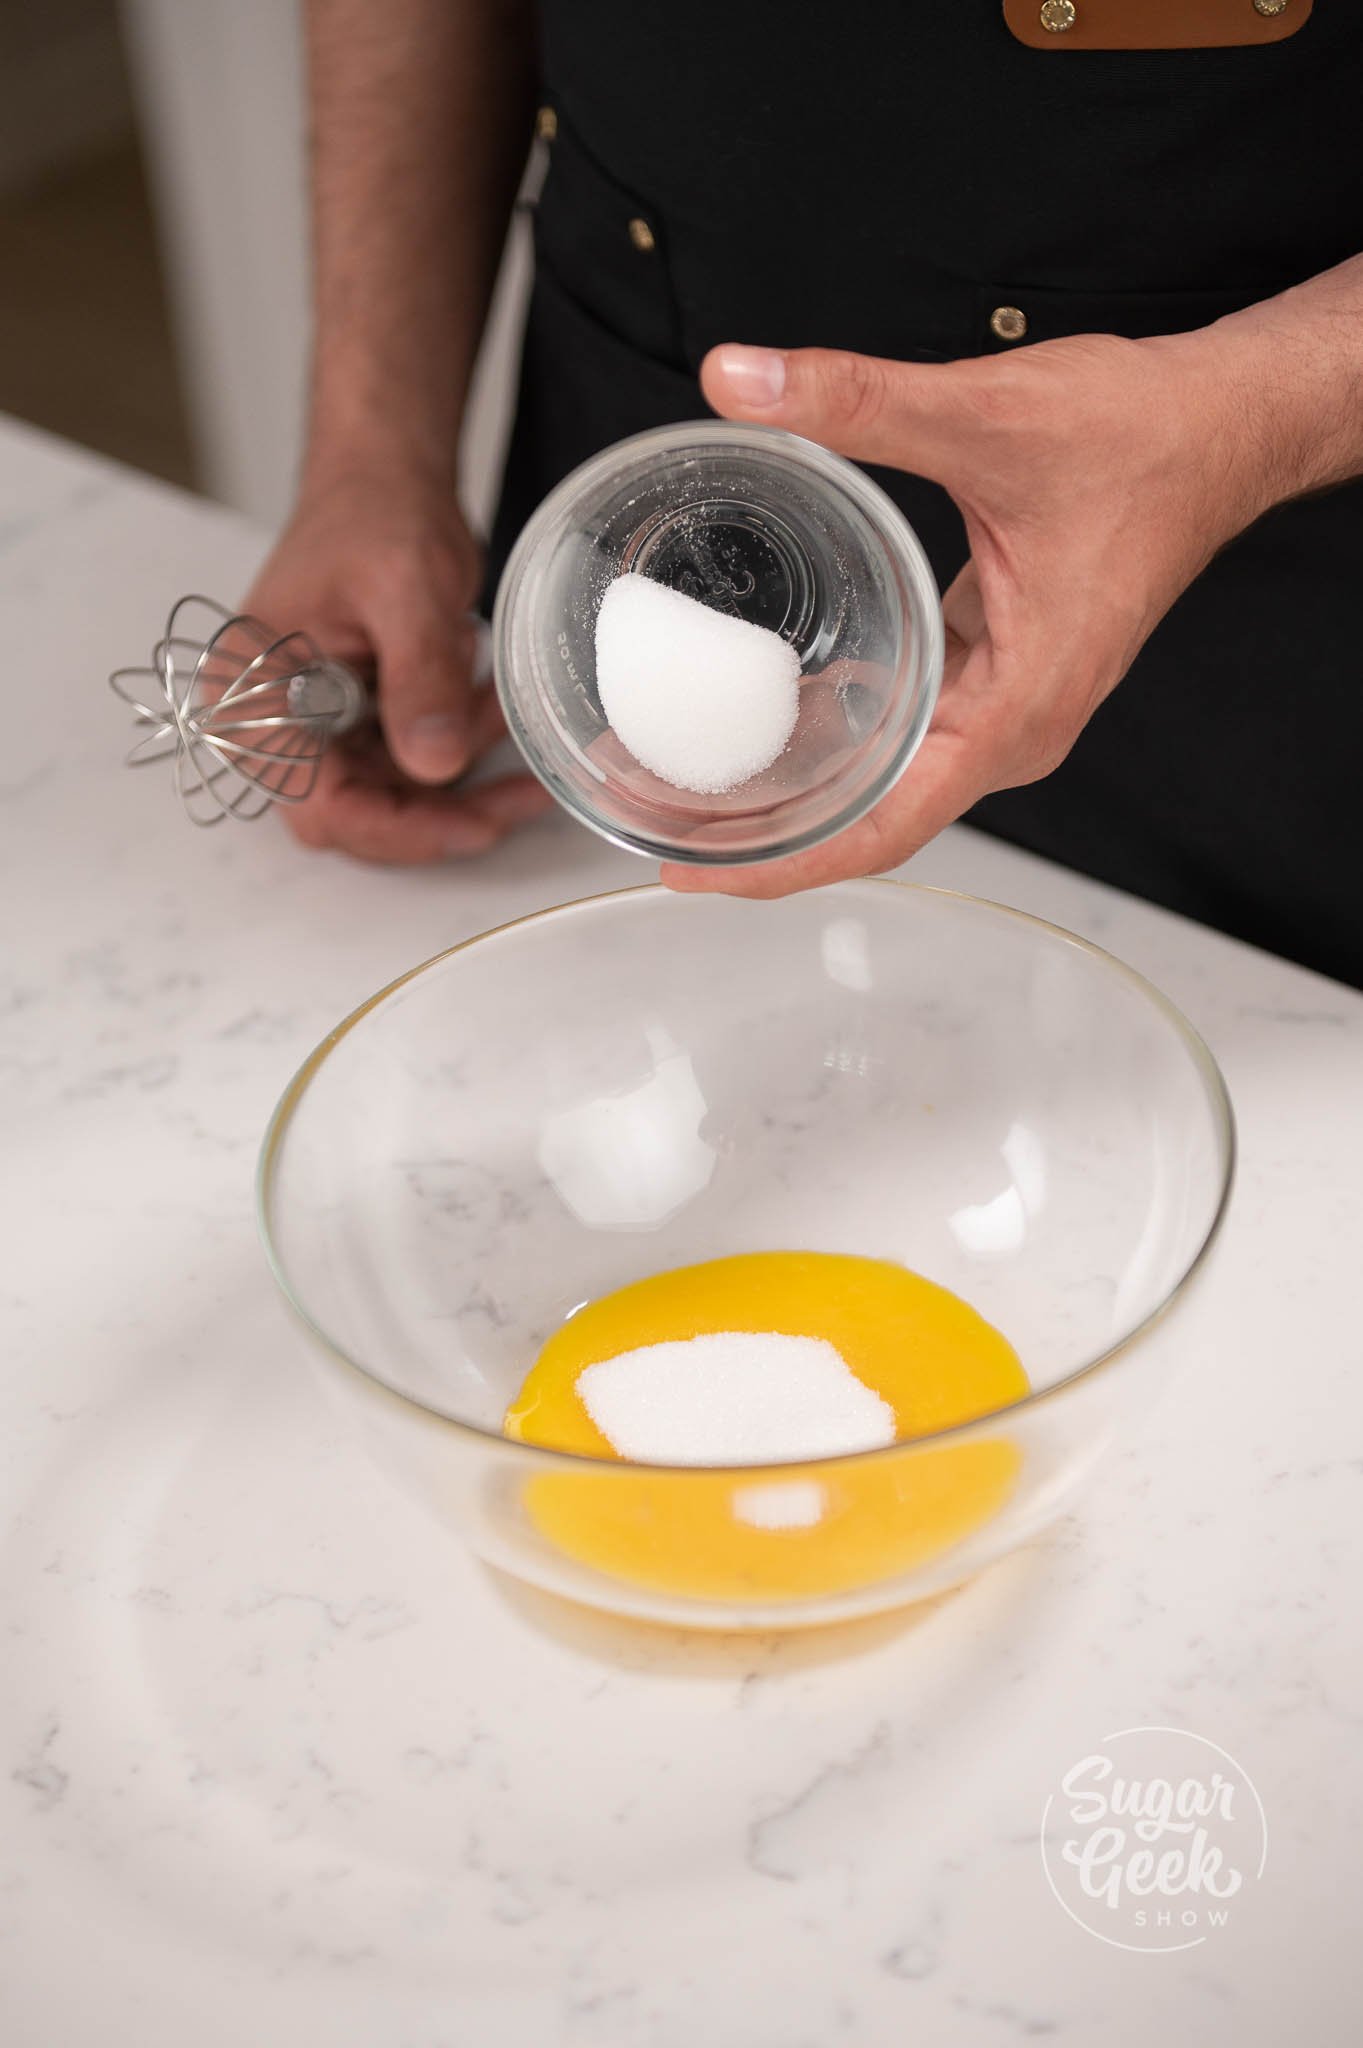 bowl of sugar being added to bowl of egg yolks